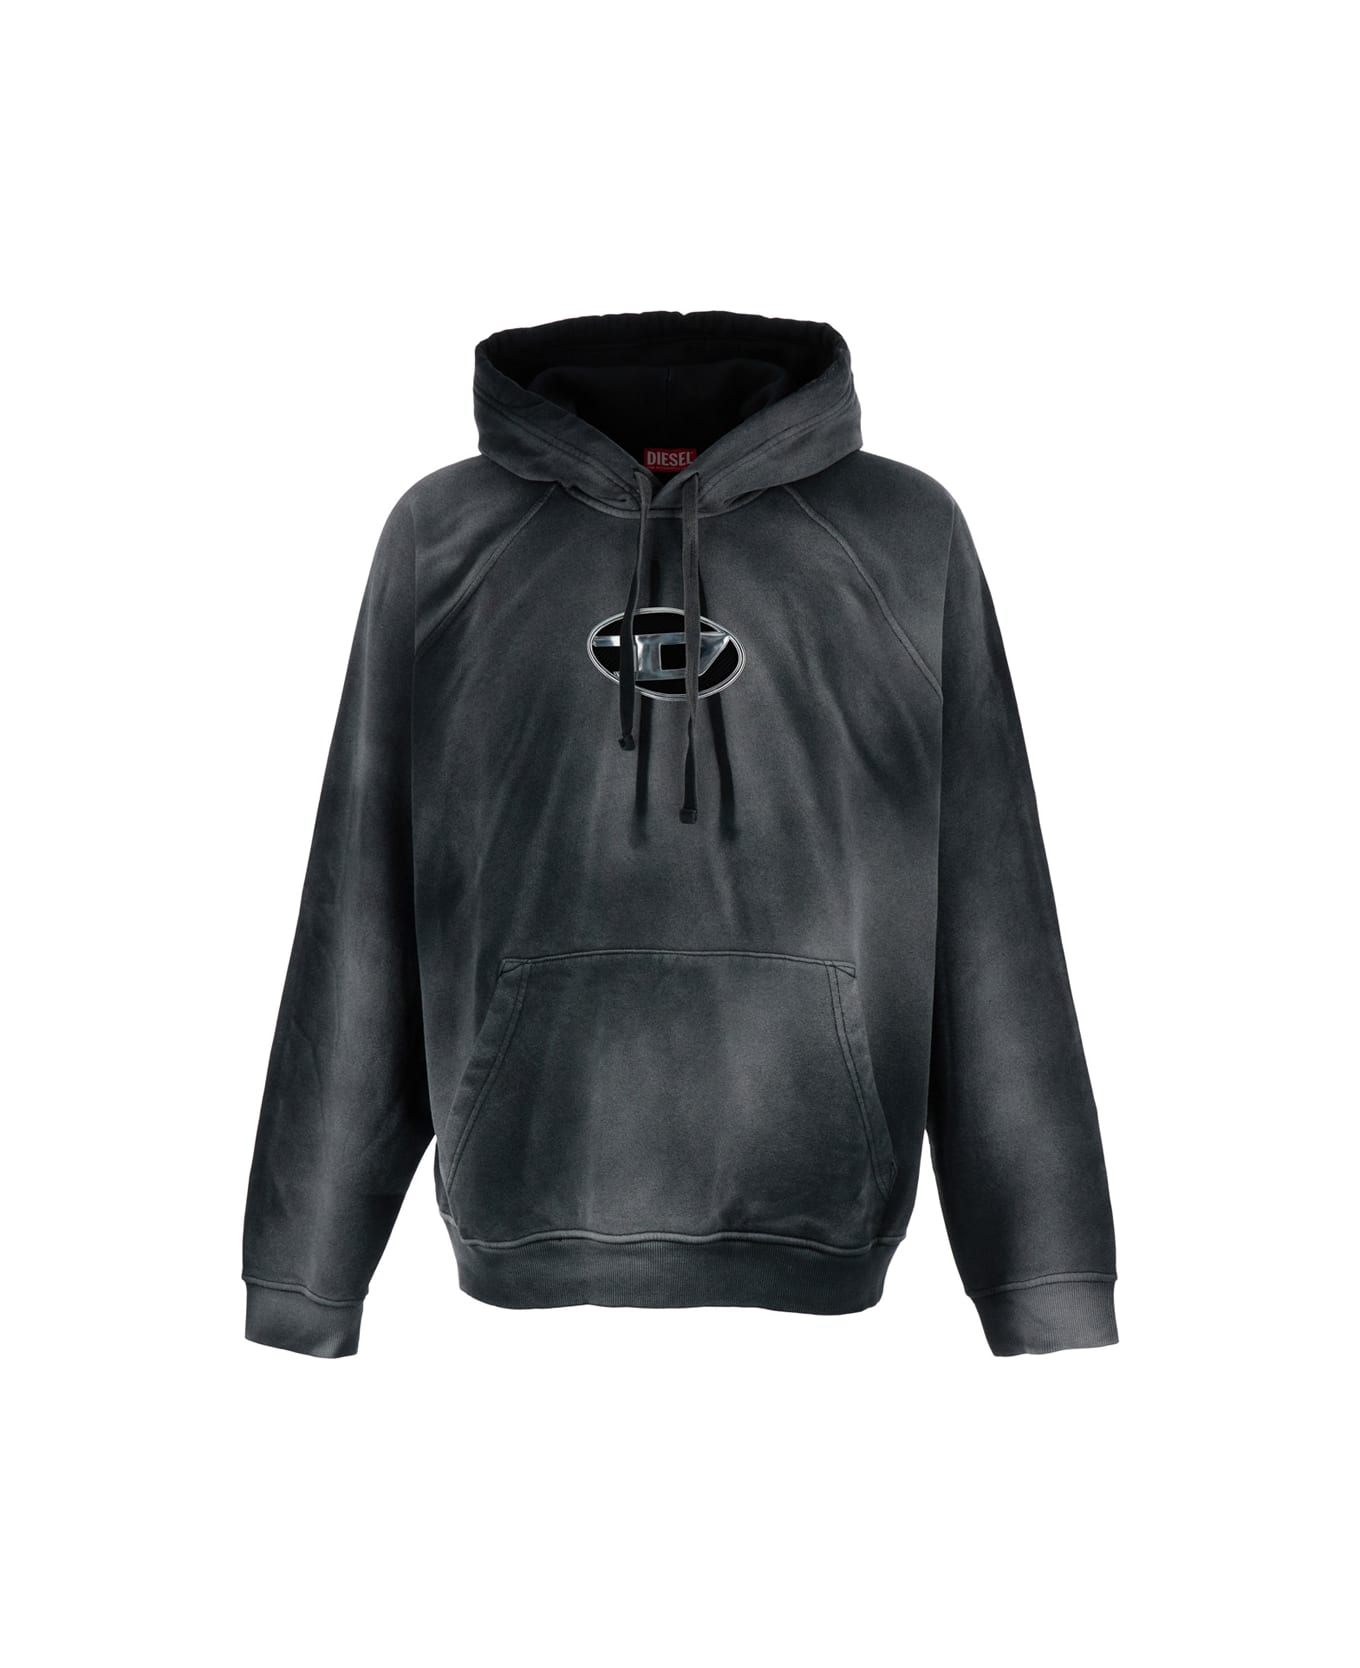 Diesel Black Hoodie With Cut Out Oval D Logo In Cotton Man - Black